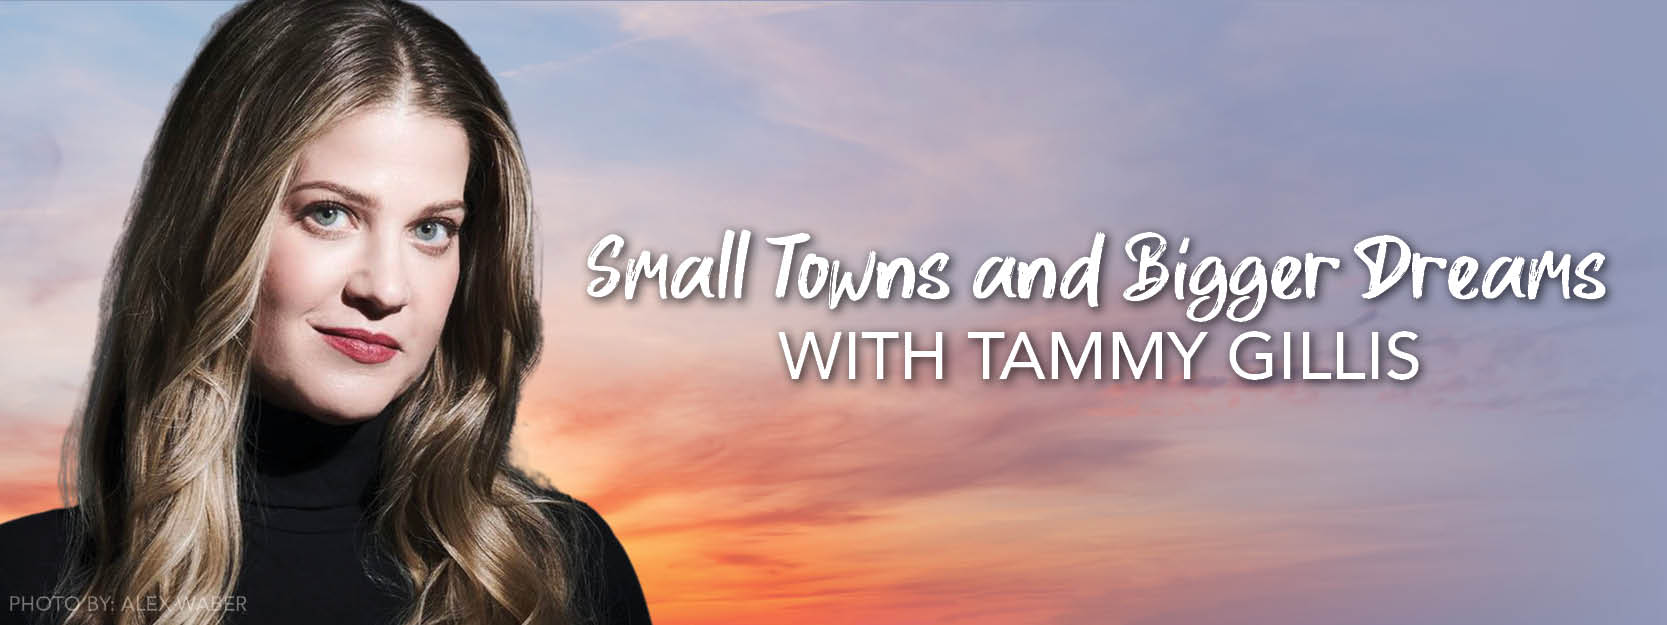 Small Towns and Bigger Dreams with Tammy Gillis 